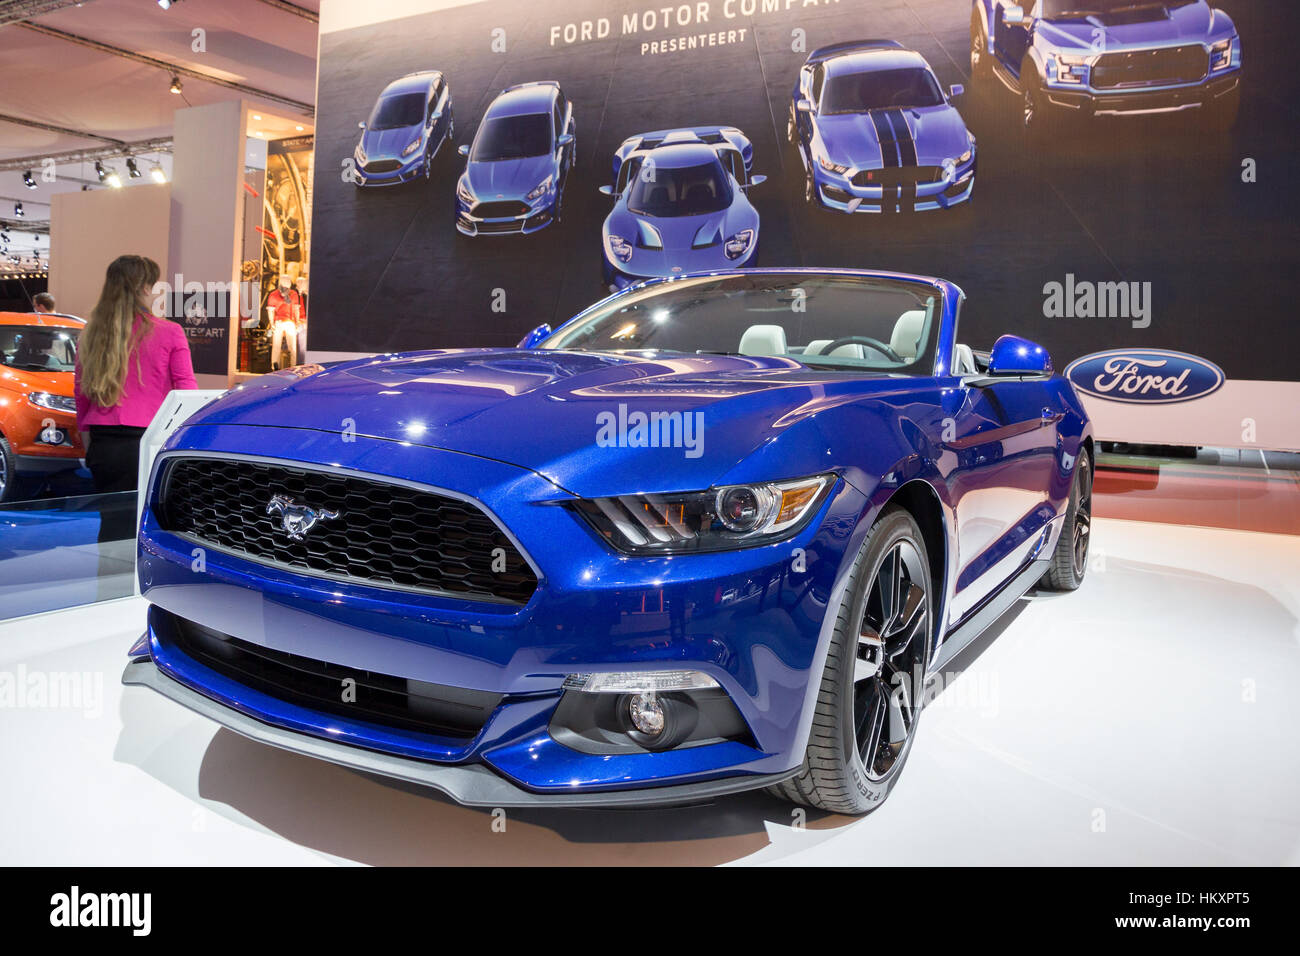 AMSTERDAM - APRIL 16, 2015: Ford Mustang at the Amsterdam AutoRAI Motor Show Stock Photo